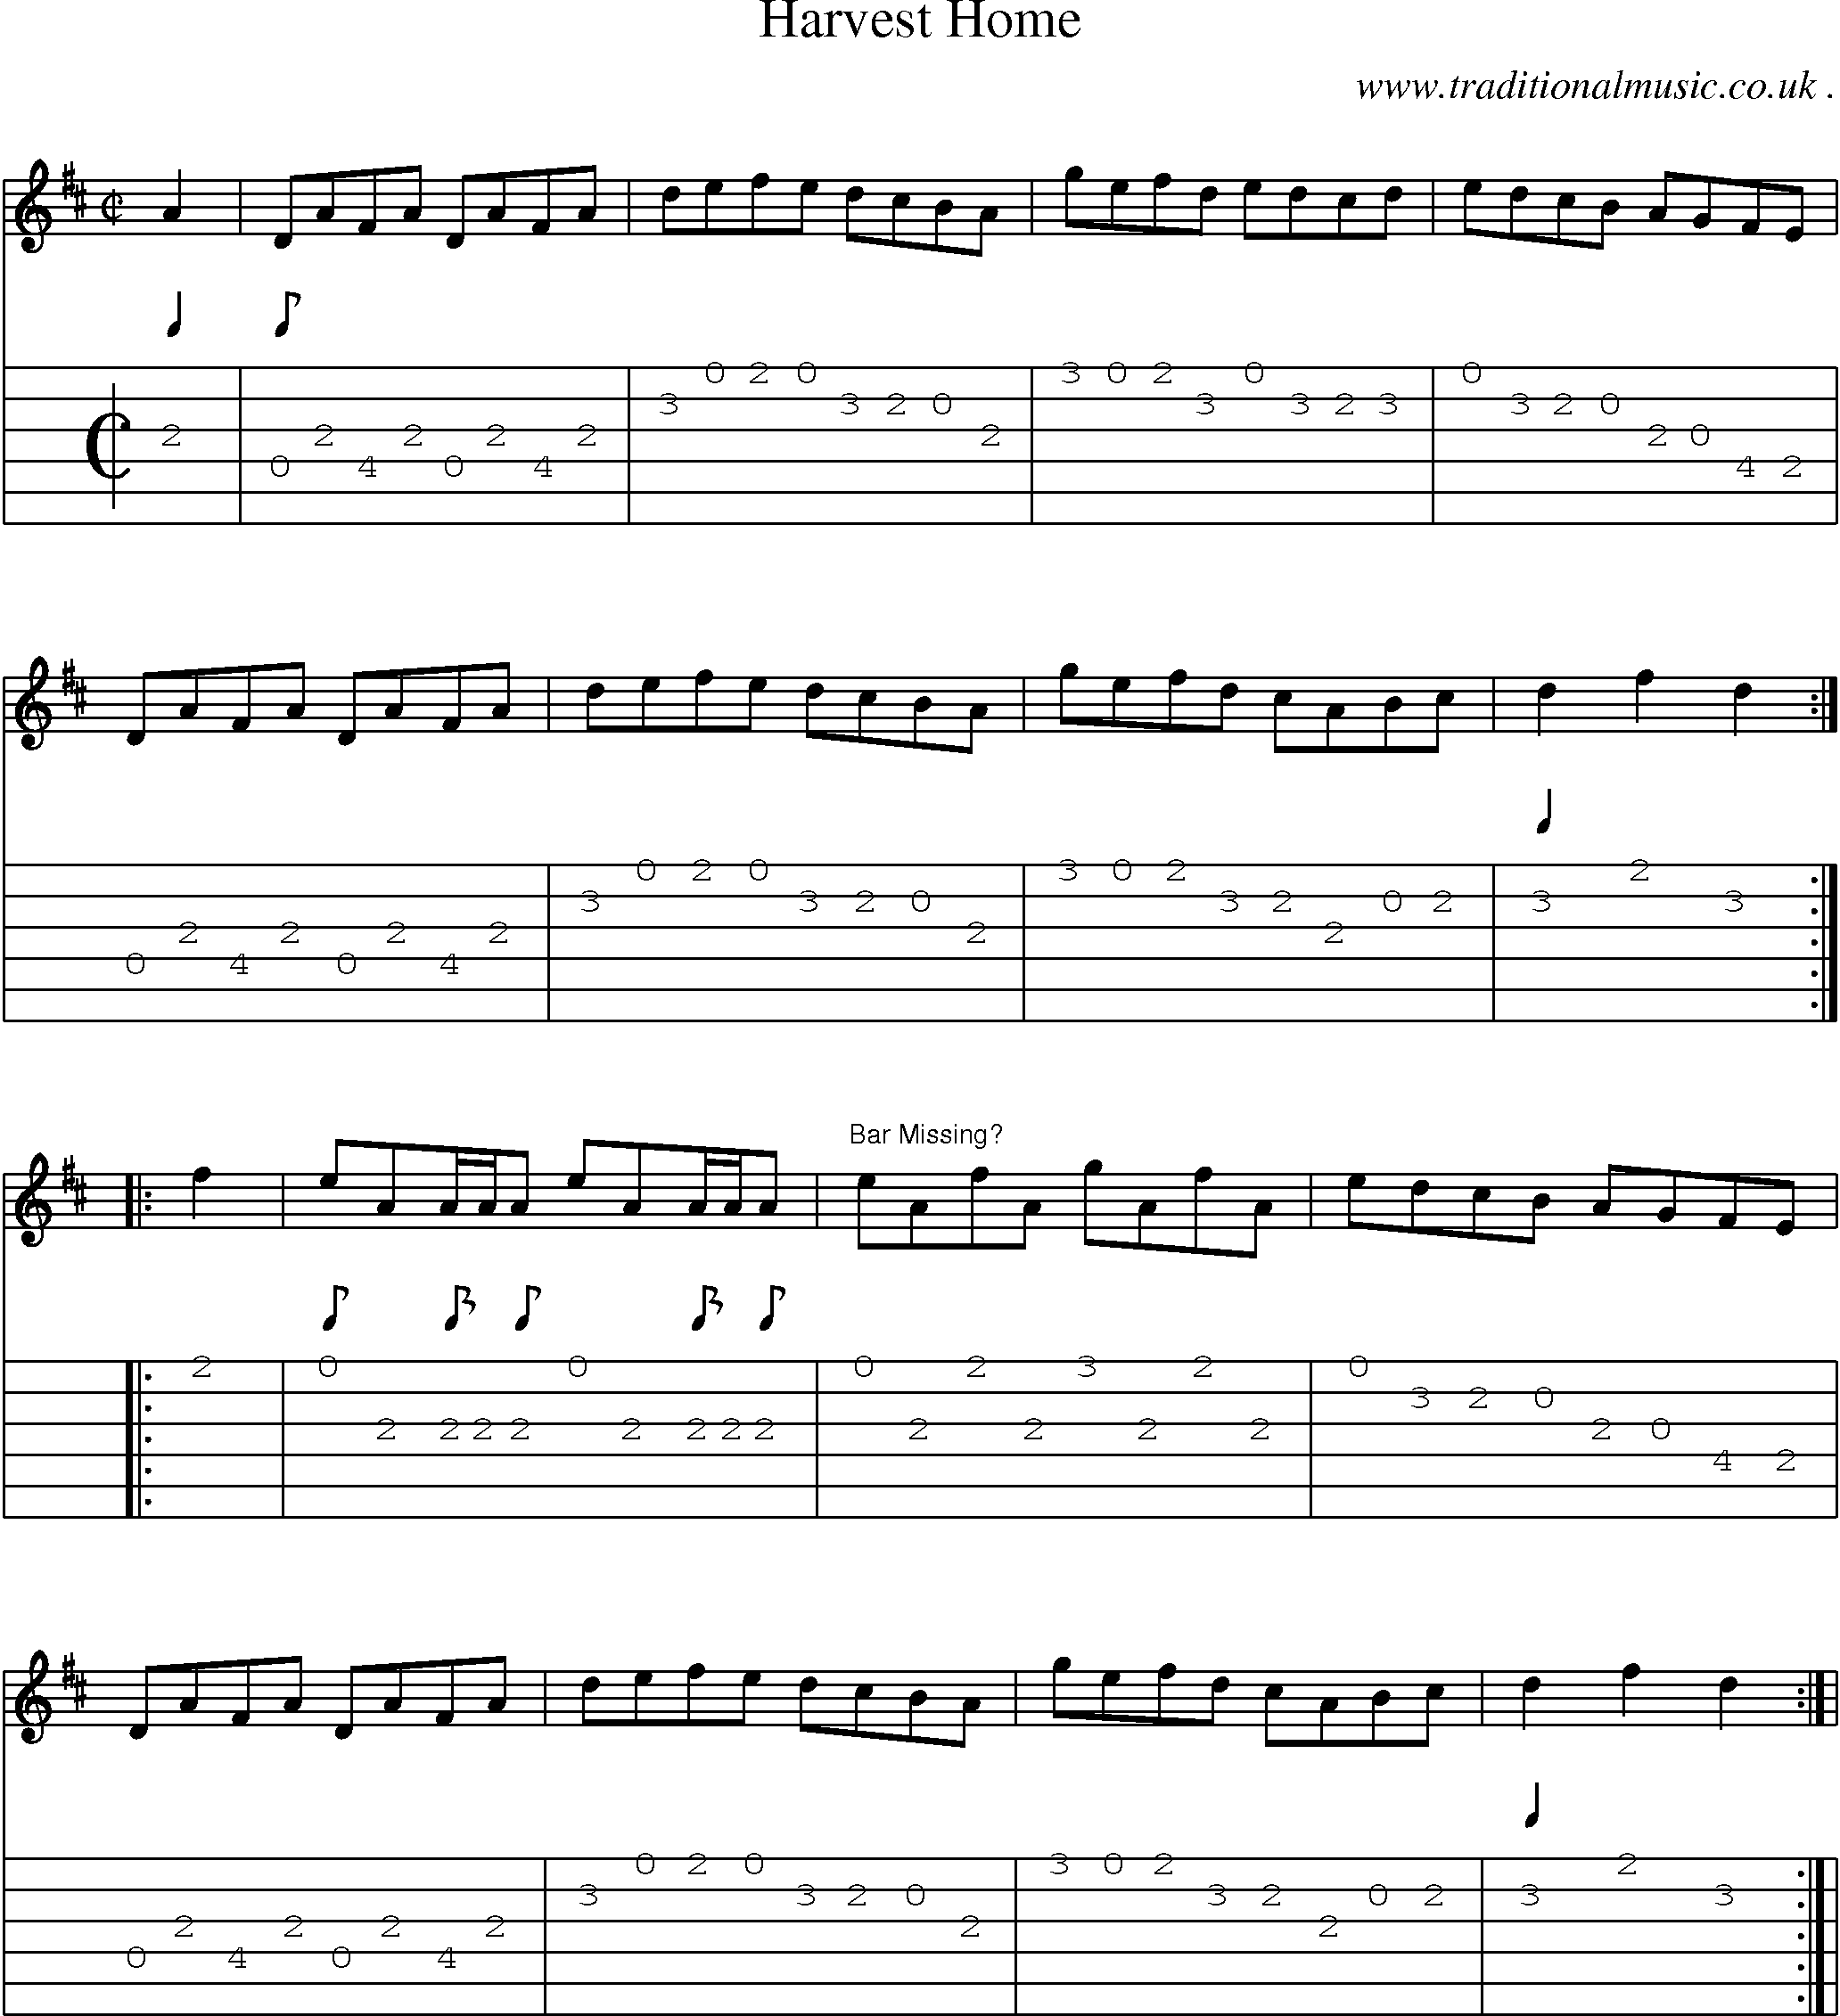 Sheet-Music and Guitar Tabs for Harvest Home